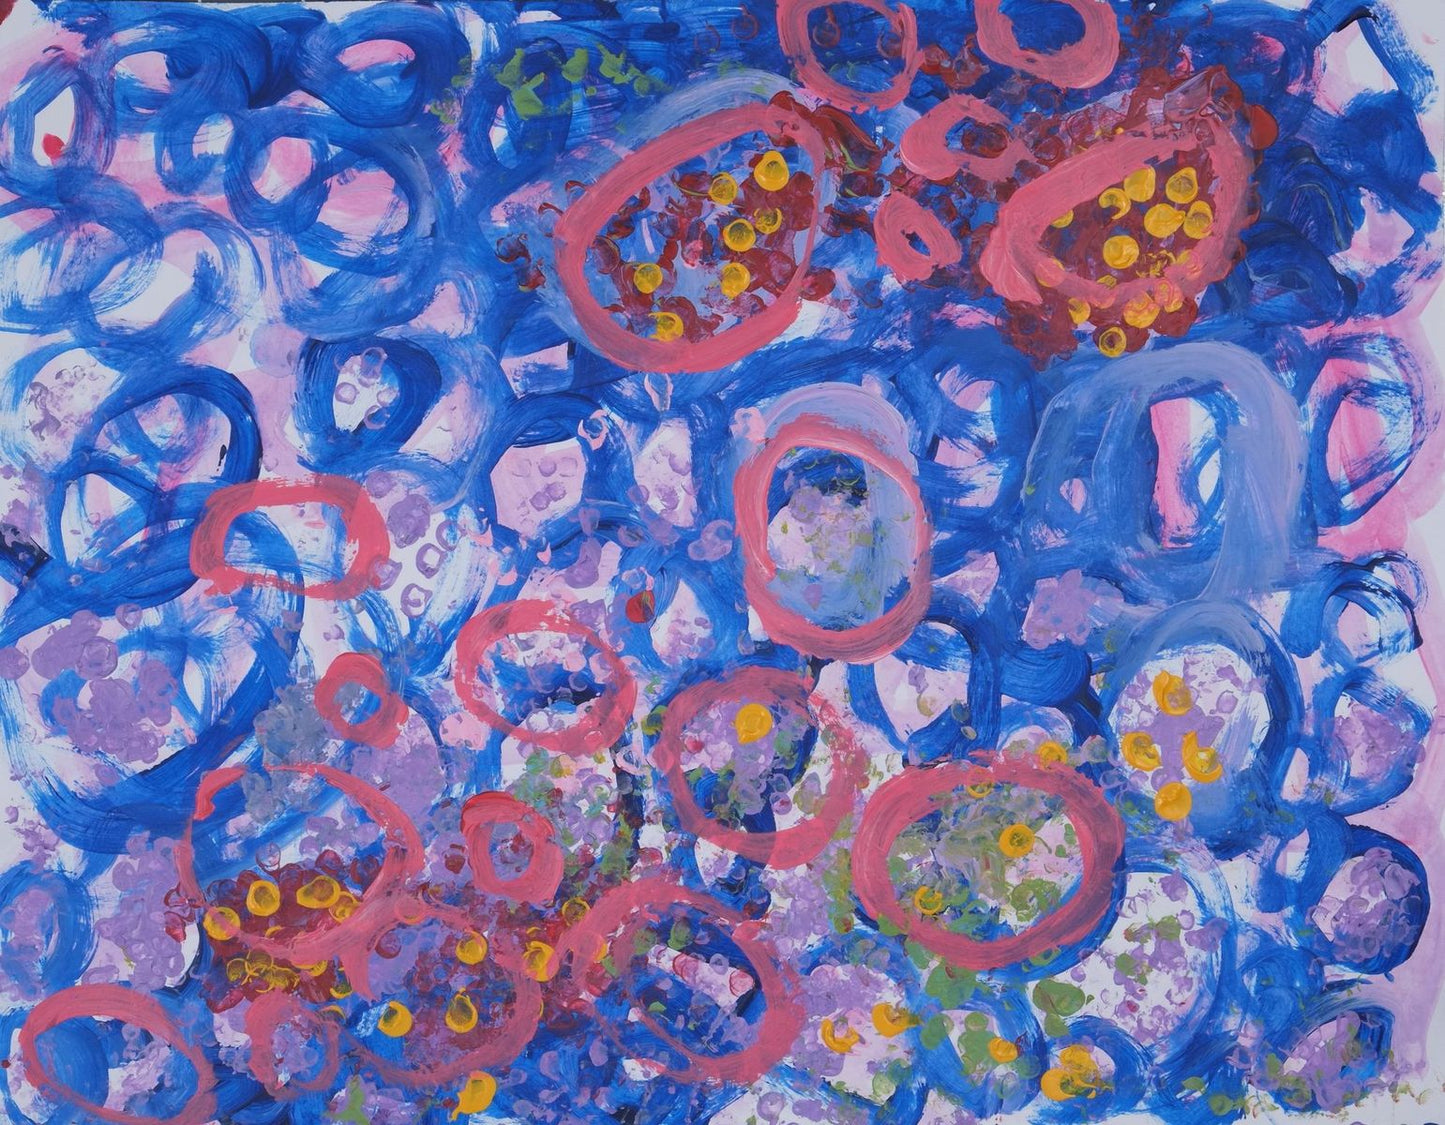 Acrylic on paper artwork with pink and lavender background and blue and pink interlocking circles overlaid